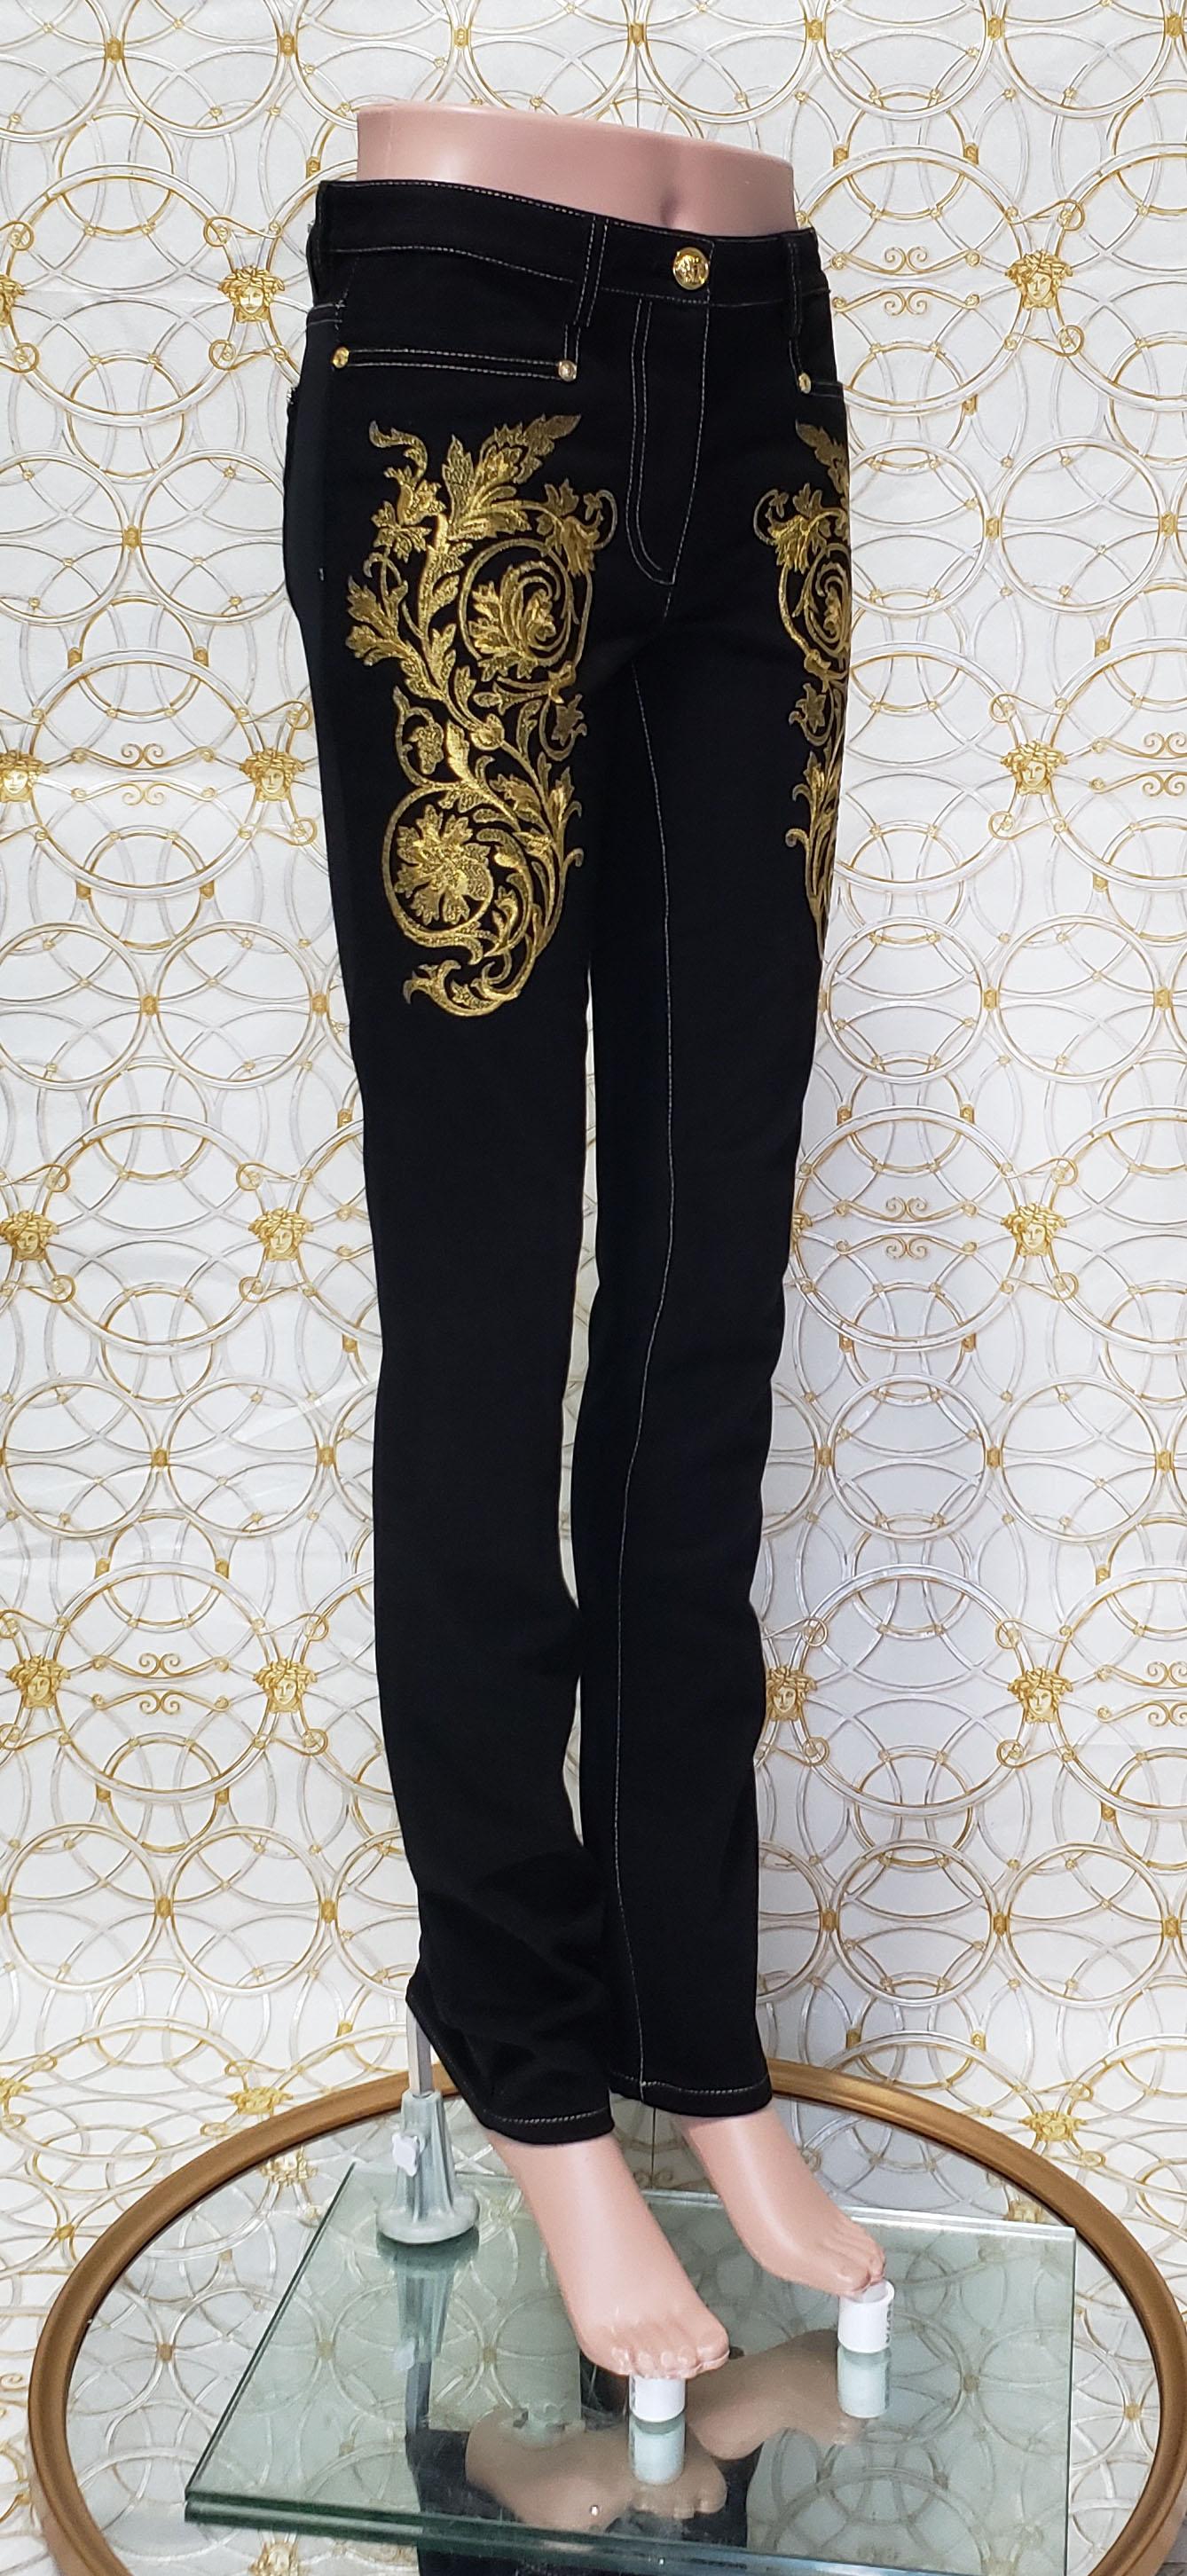 Pre-Fall 2013 L # 2 BRAND NEW VERSACE BAROQUE GOLD EMBROIDERED JEANS size 26 For Sale 6